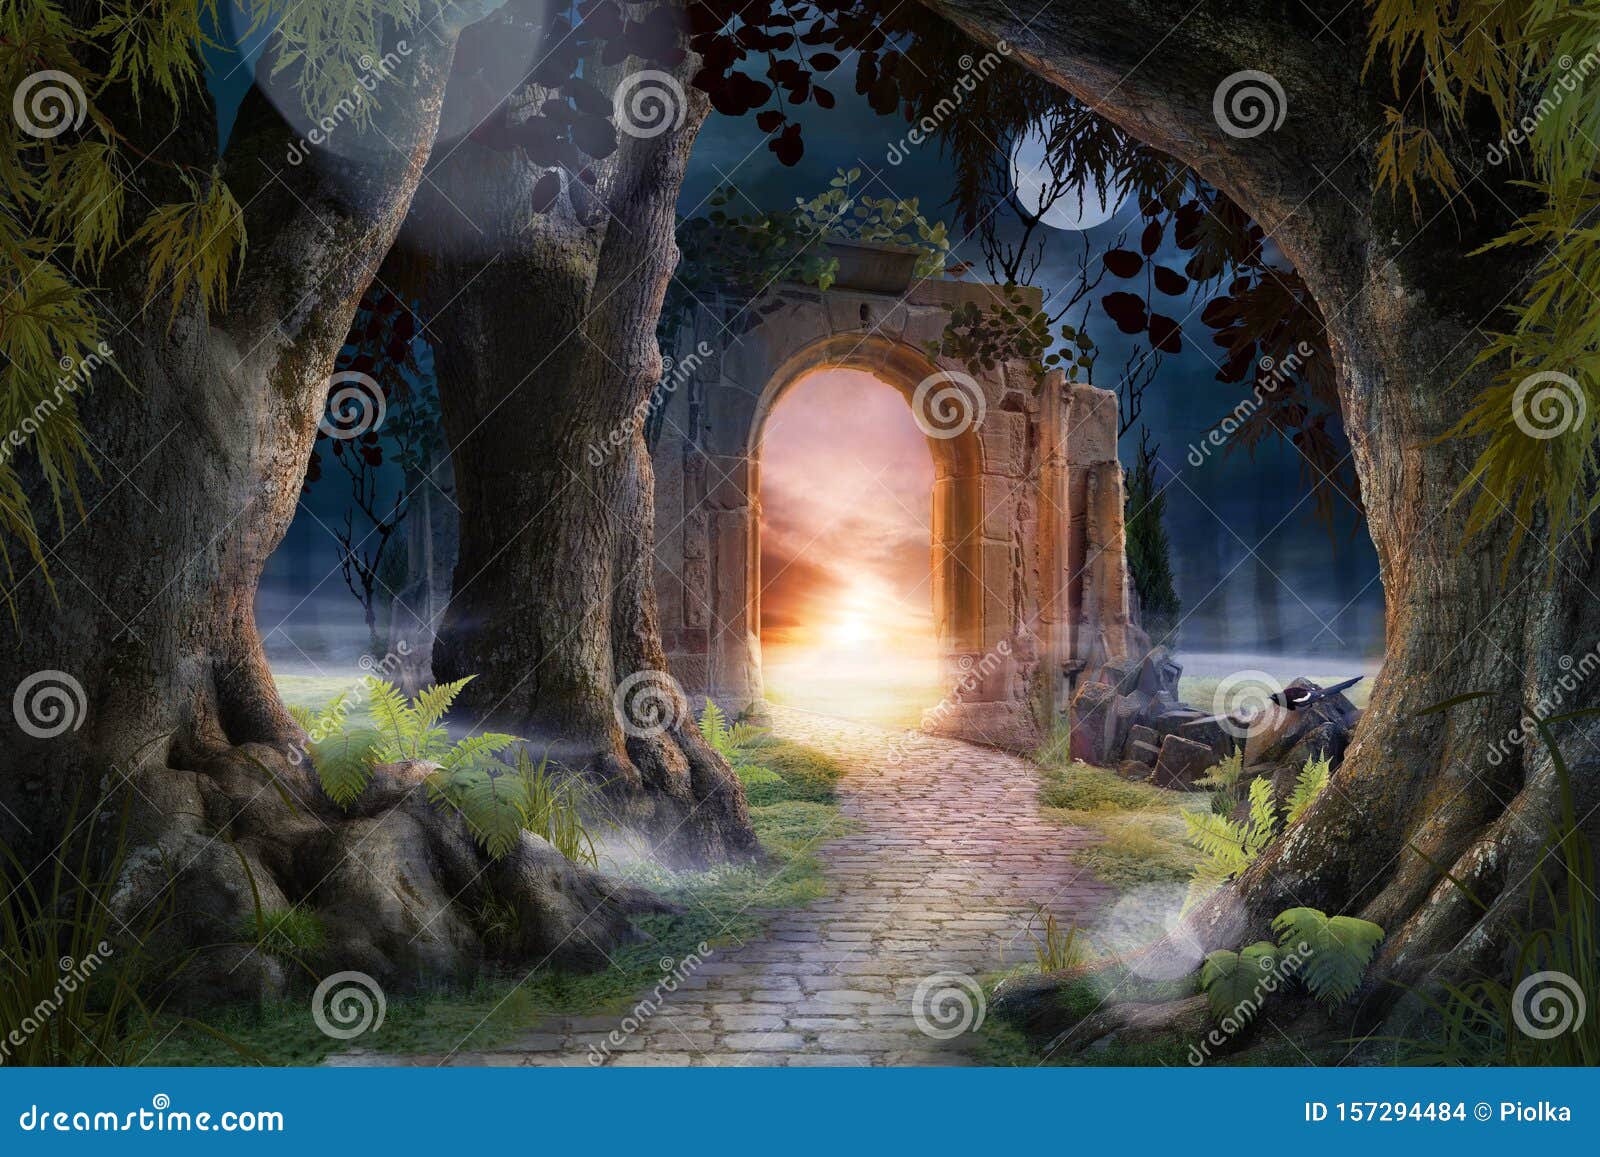 archway in an enchanted fairy garden landscape